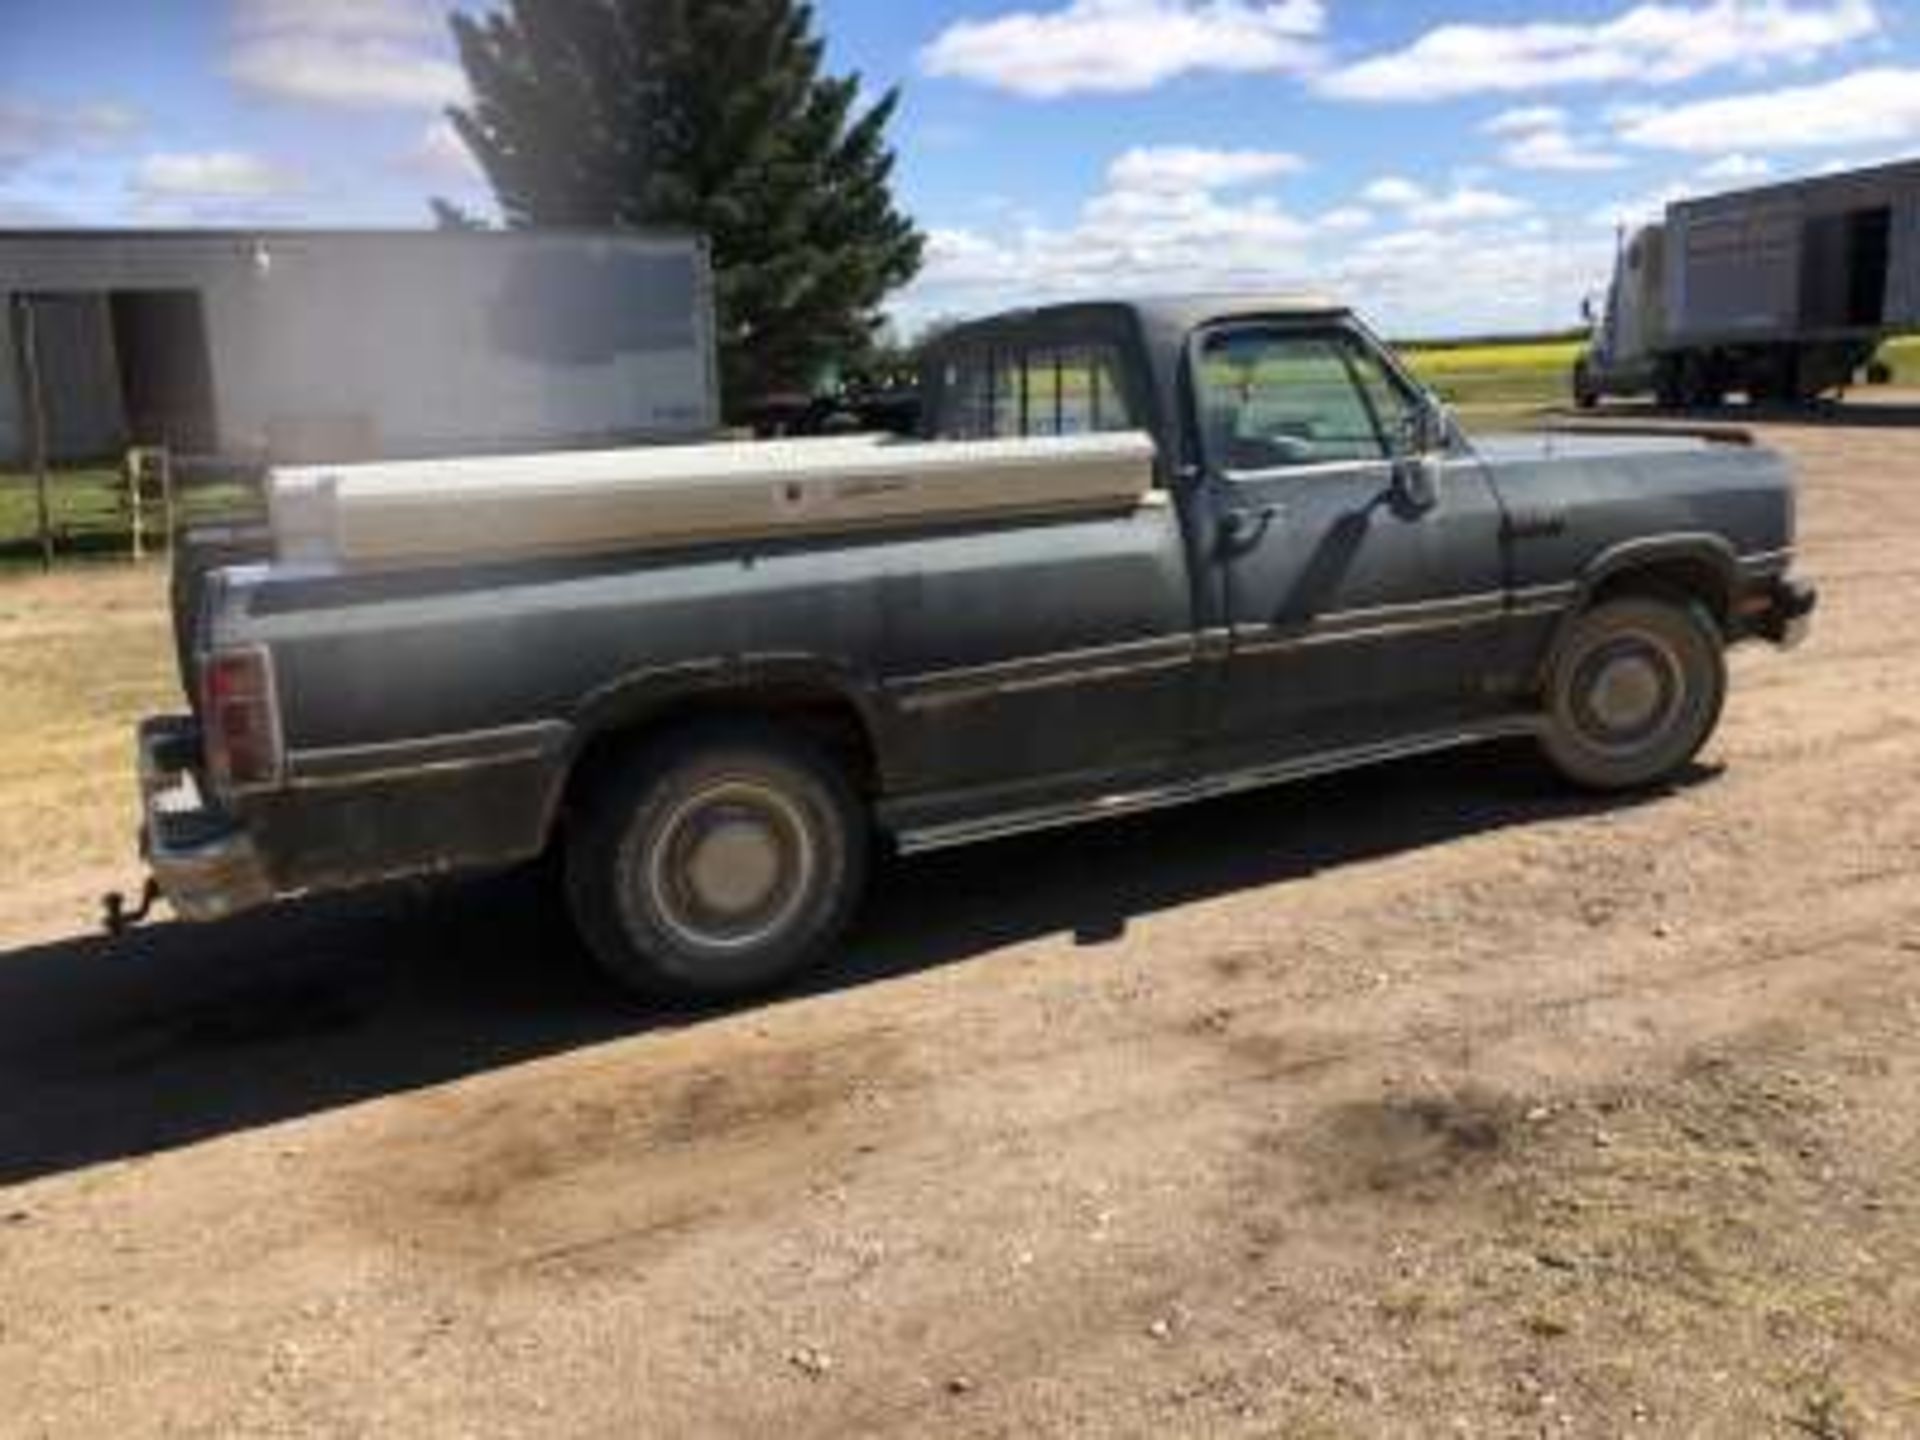 1991 Dodge D250 dsl 3/4 ton truck, 5spd, 5.9 cummins engine (tool boxes not included) (reg in sask) - Image 3 of 3